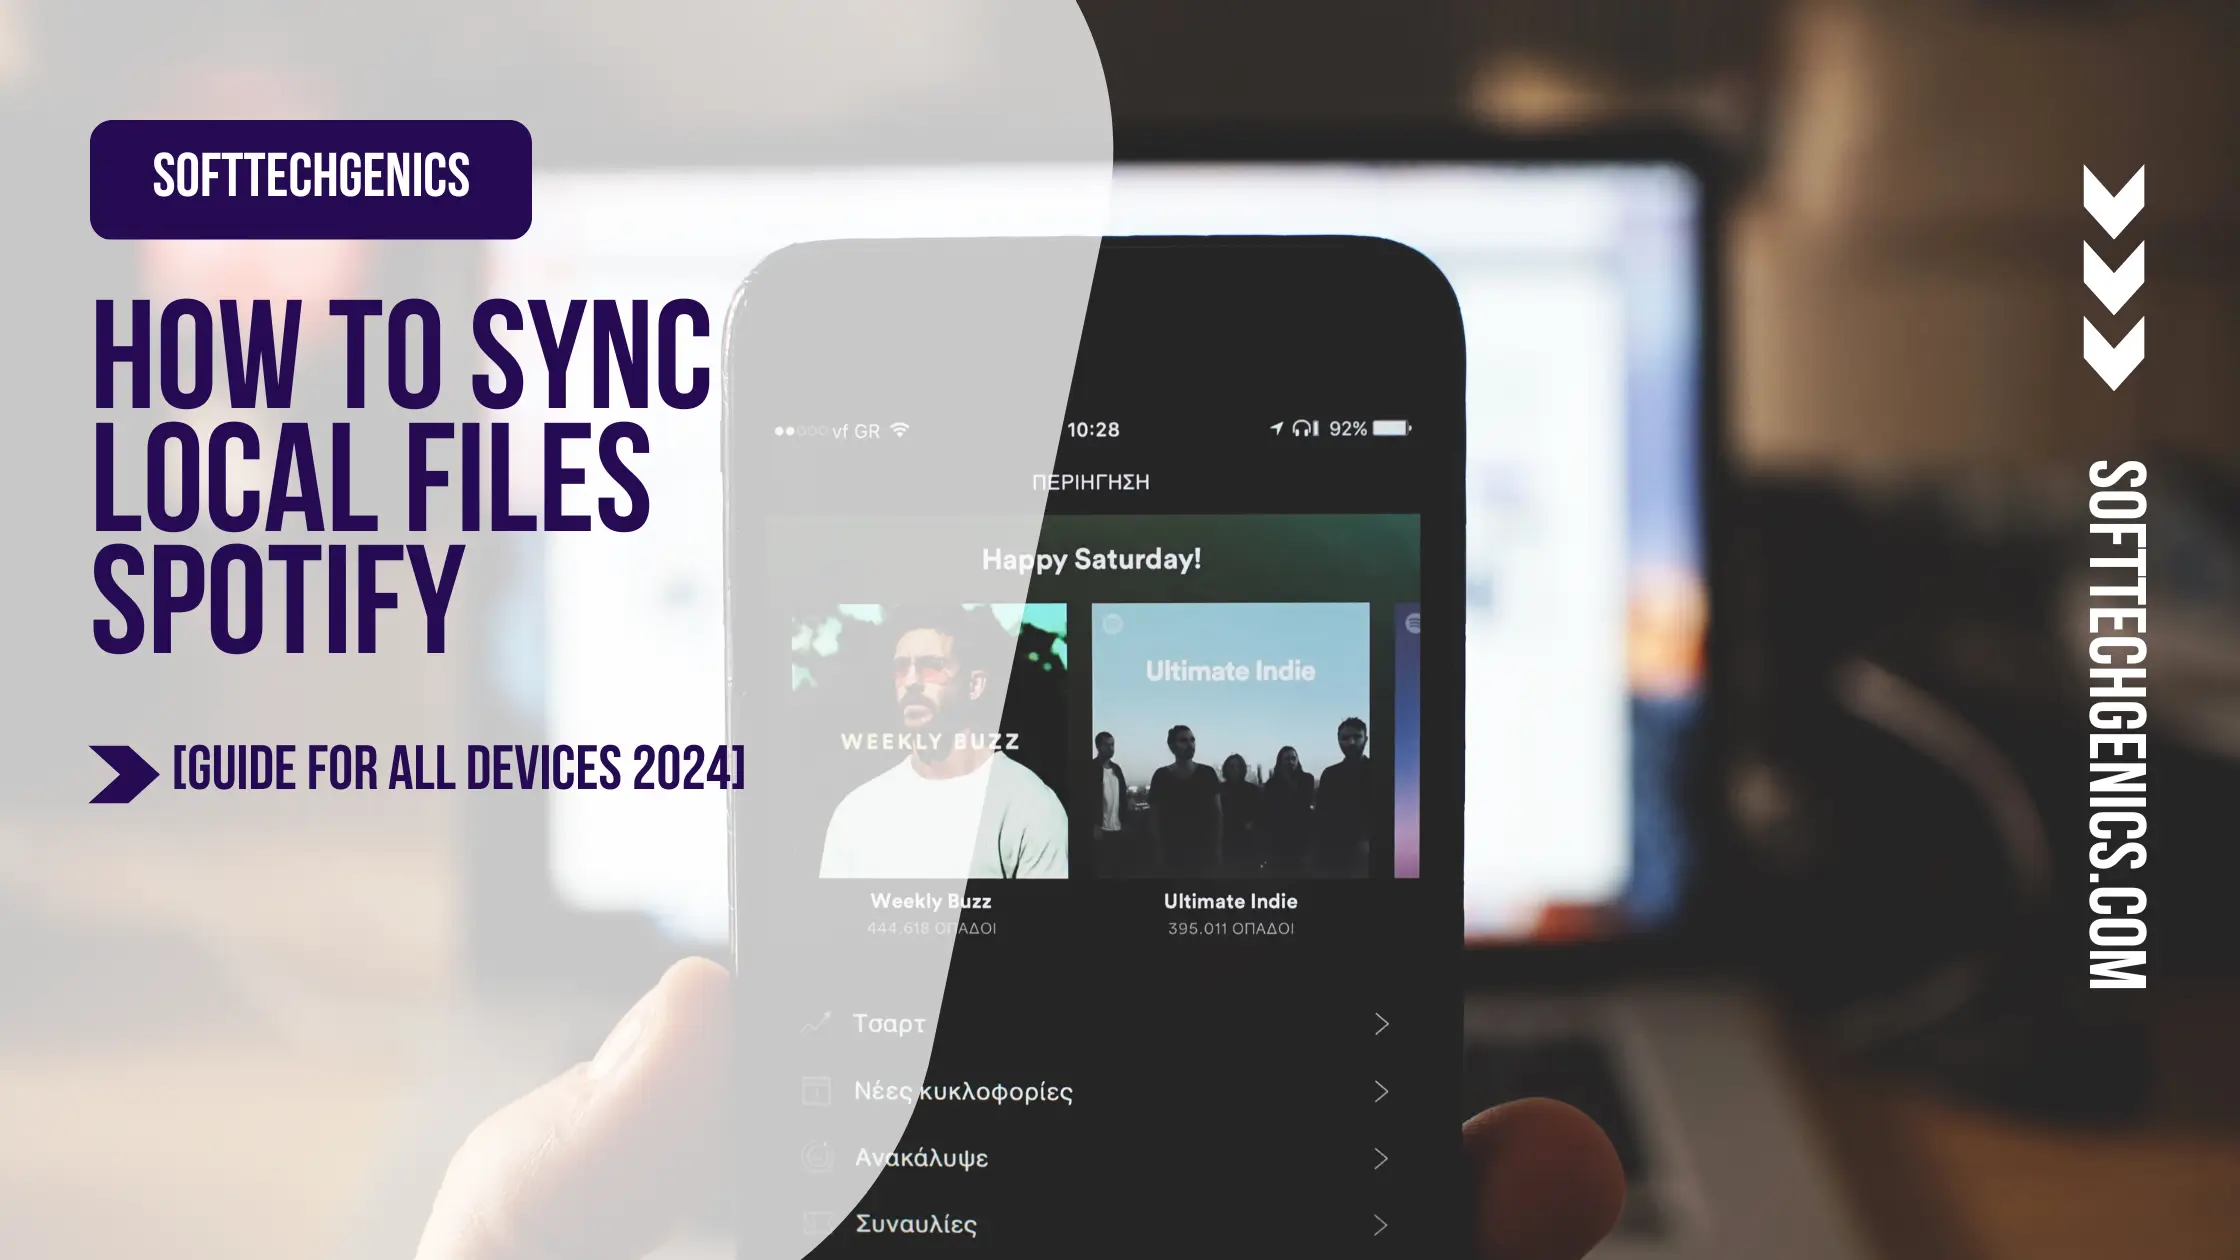 How To Sync Local Files Spotify [Guide For All Devices 2024